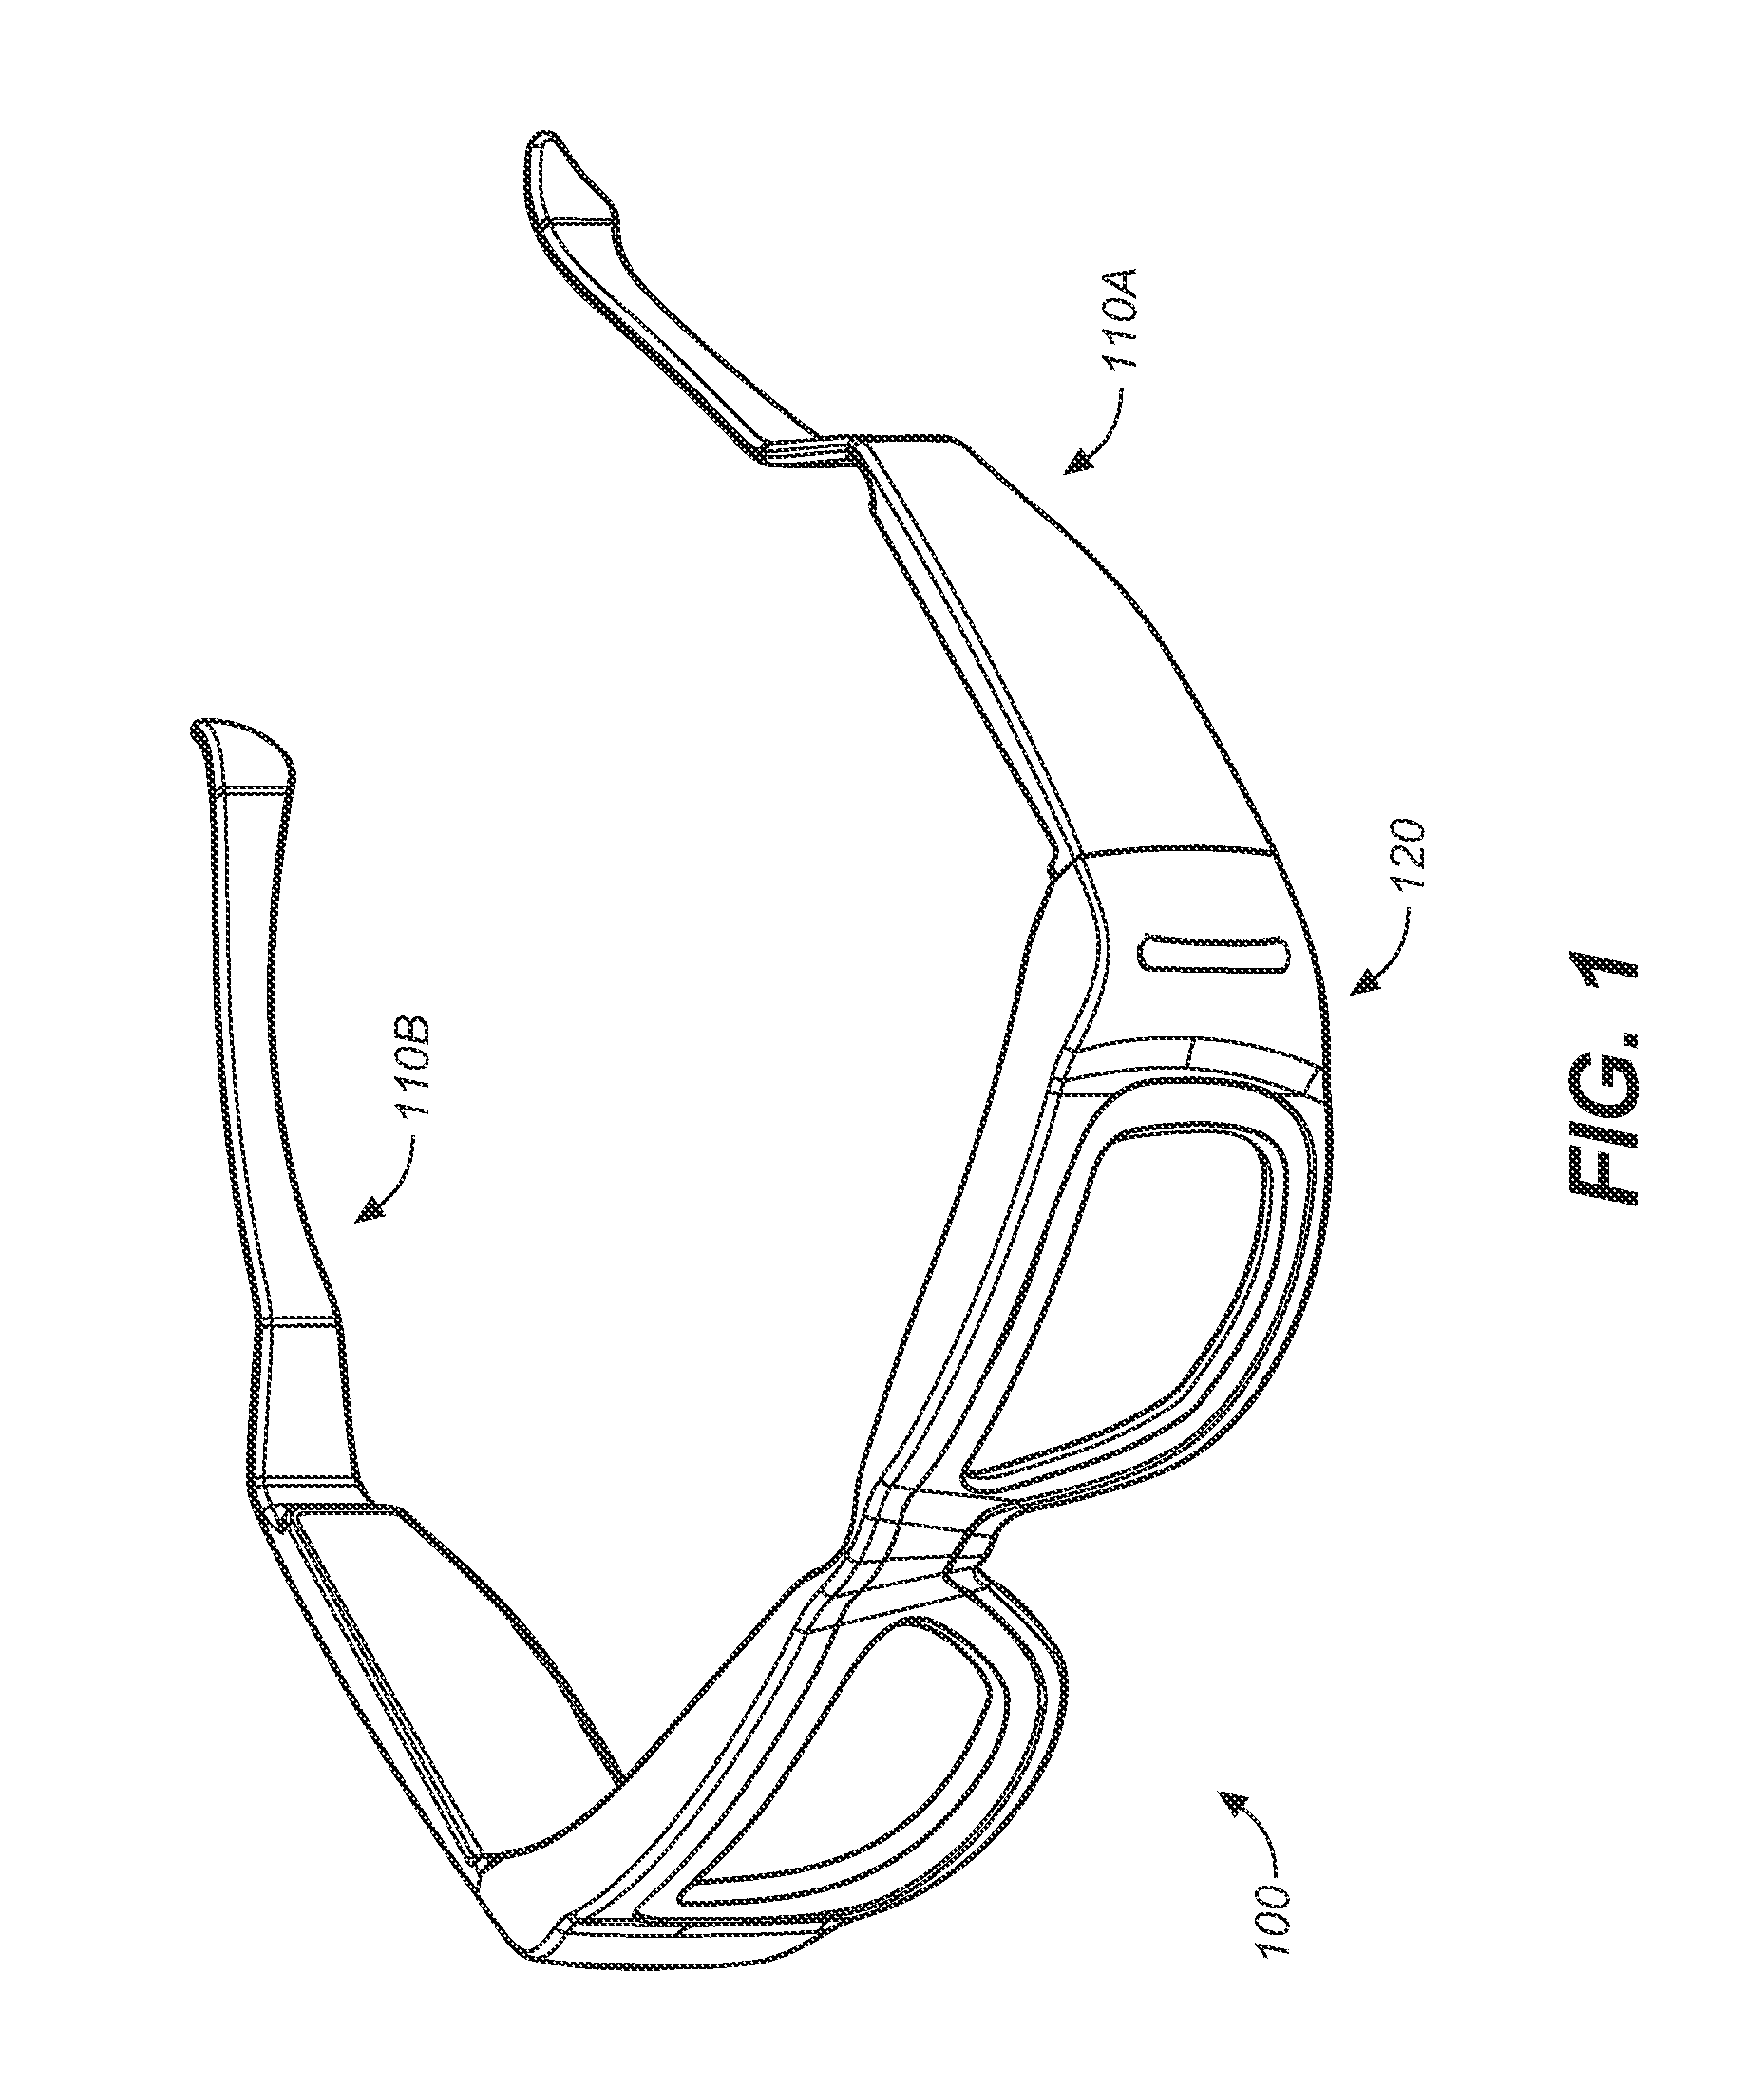 Eyeglasses for personal and commercial use including reuse in 3D theater and other repeated operations